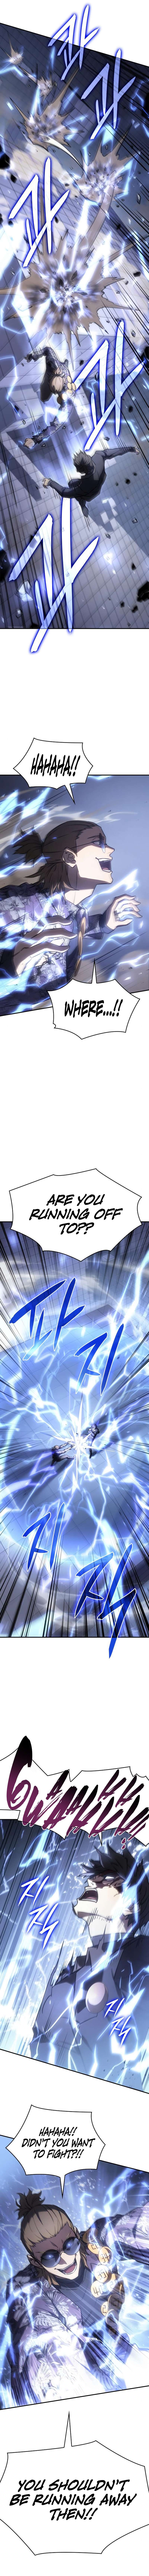 Regressing with the King’s Power - chapter 16 - #6